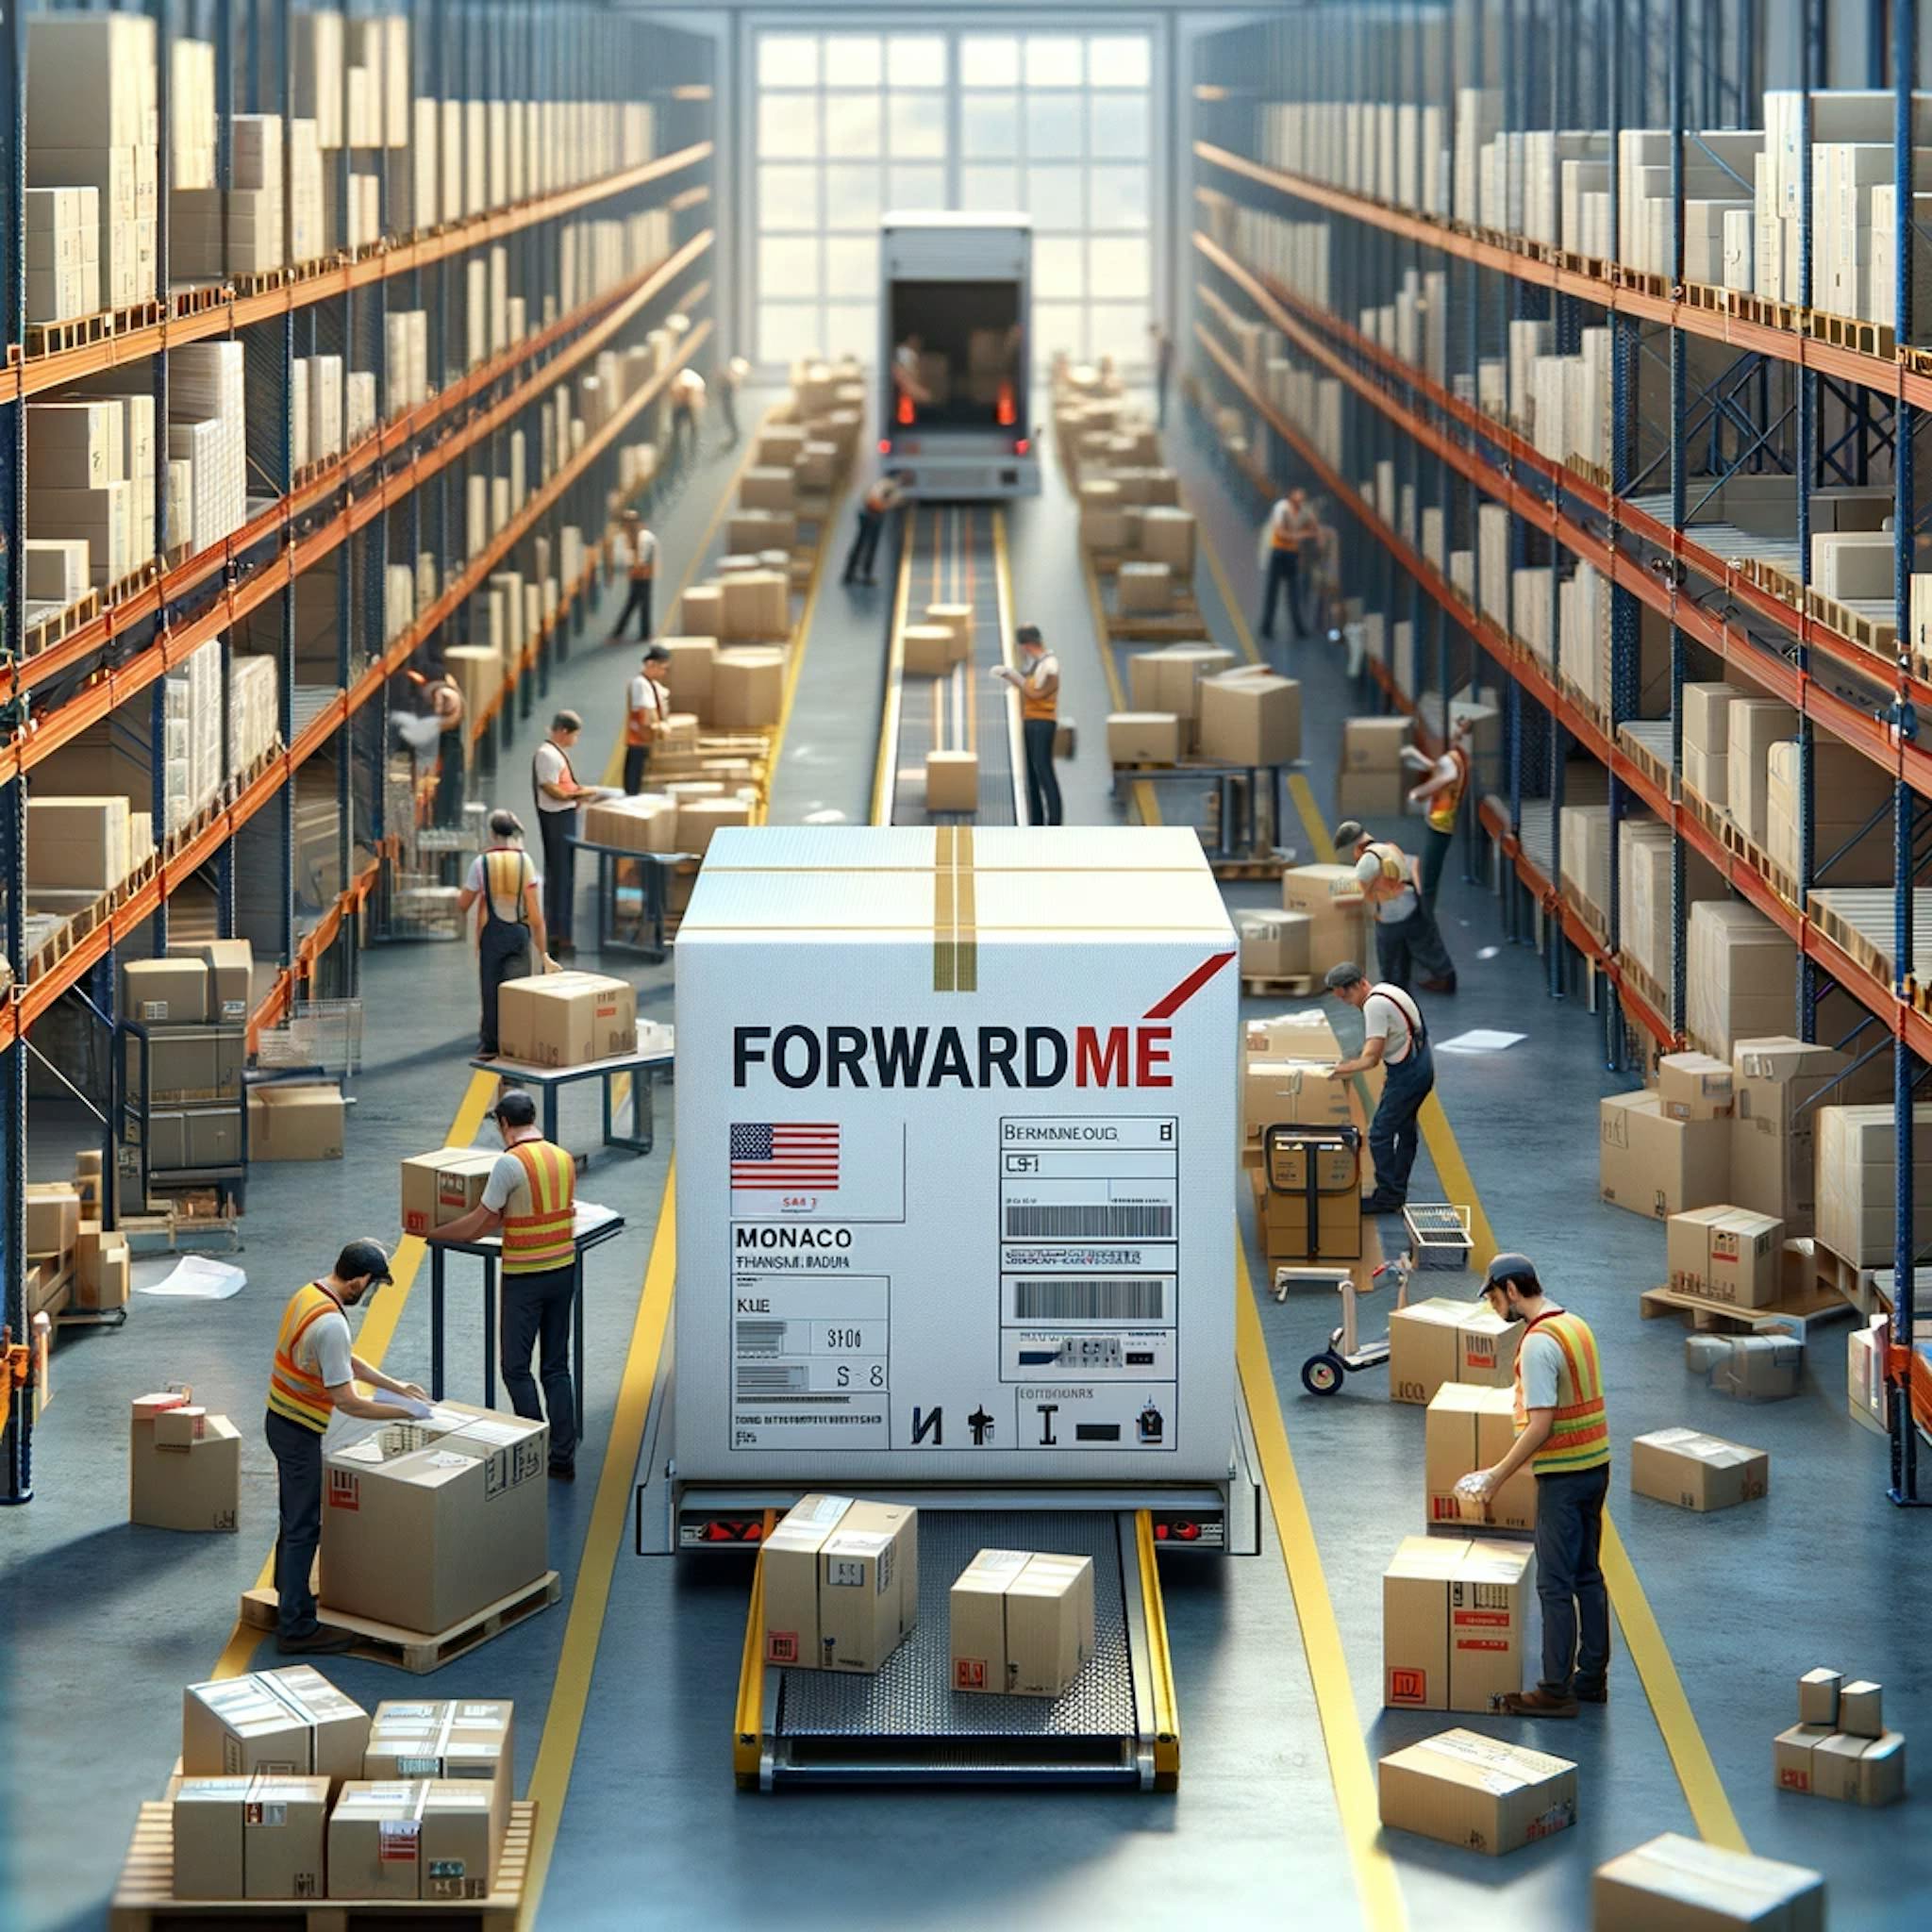  a package being prepared in the Forwardme warehouse for international shipping to Monaco.